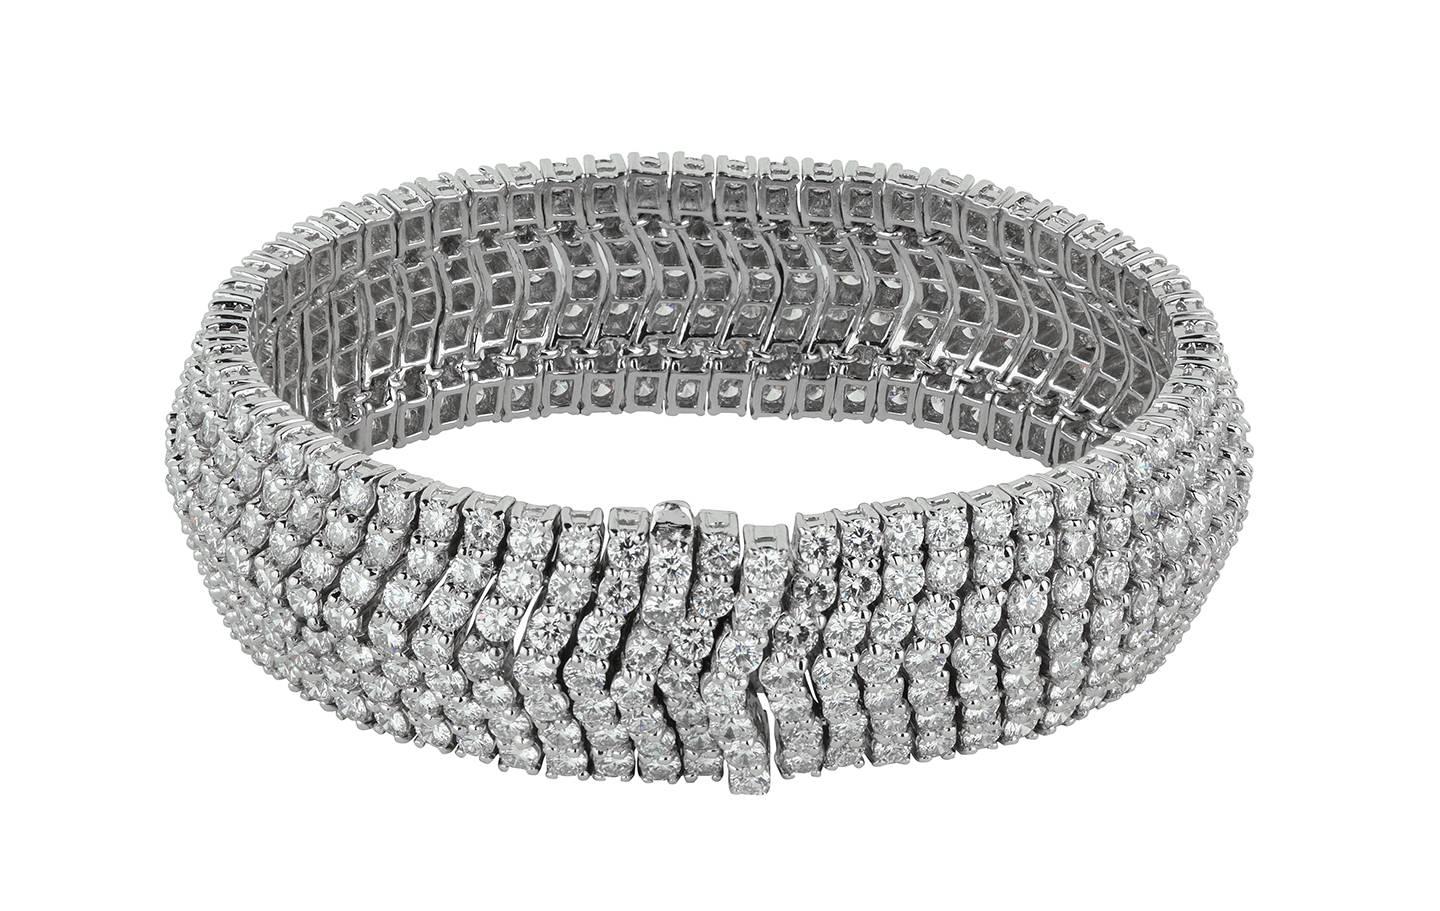 An absolutely stunning round brilliant diamond and platinum flexible bracelet.  There are seven rows of diamonds in a chevron shape pattern, totaling an estimated 30.64cts, F-G color, VS clarity.

Hallmark:  PT950
* 7.00 inches in length